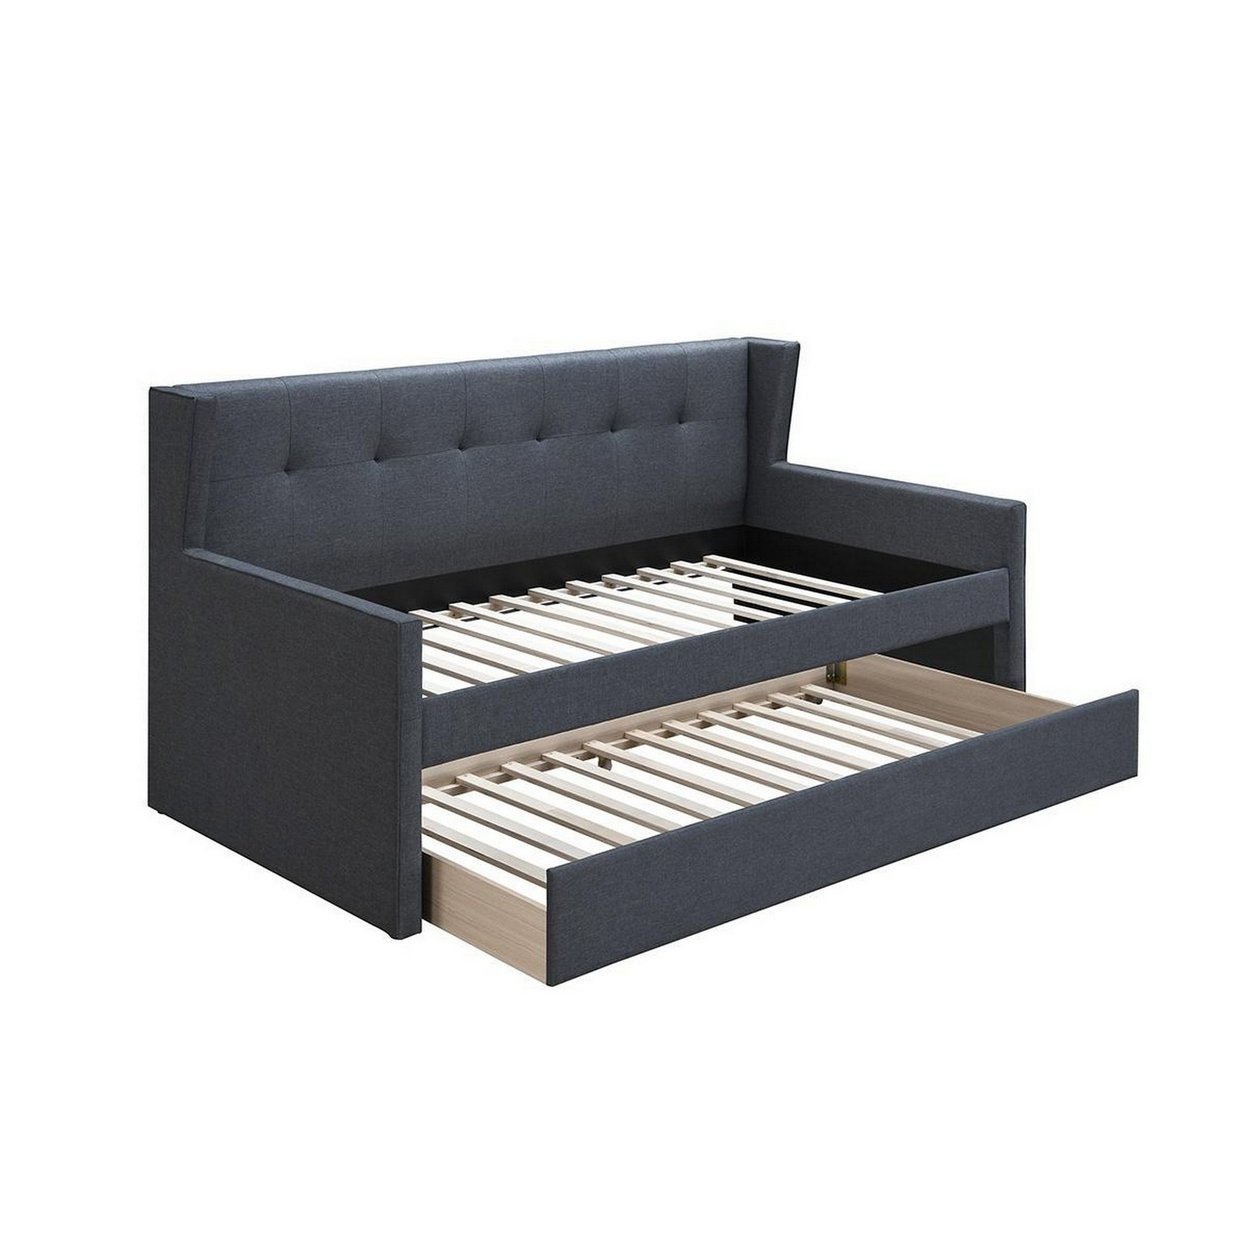 Diem Classic Wood Day Bed With Trundle, Button Tufted Back, Charcoal Burlap- Saltoro Sherpi